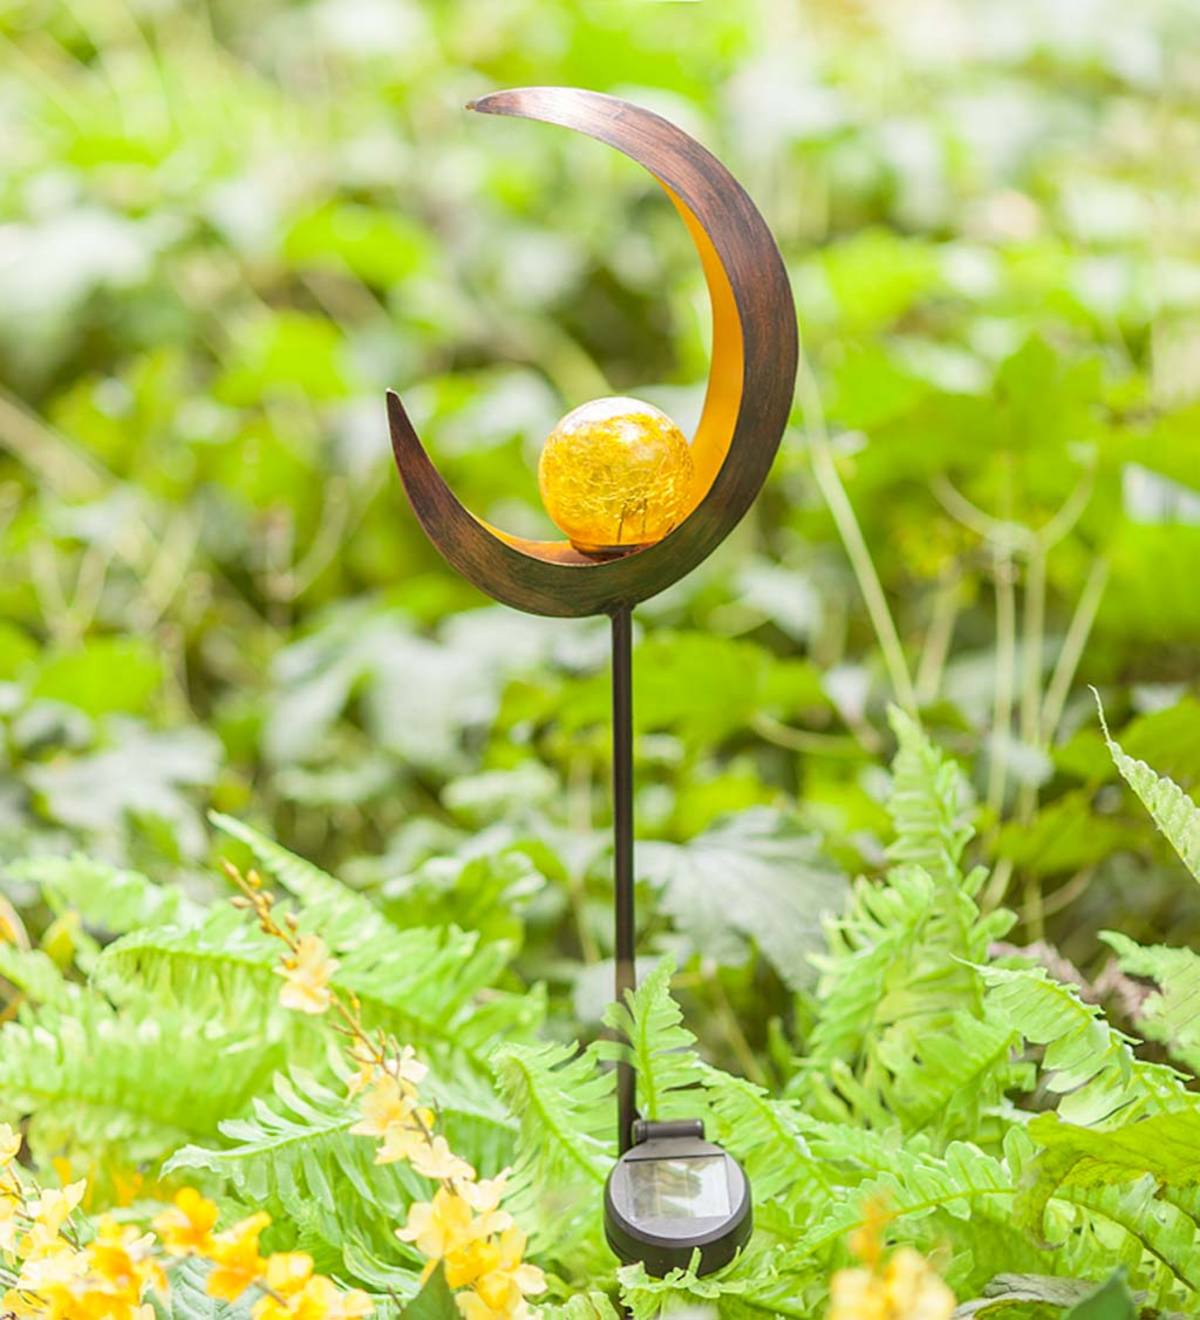 Outdoor Solar Garden Stake Light Color Changing Decorative Led Stake